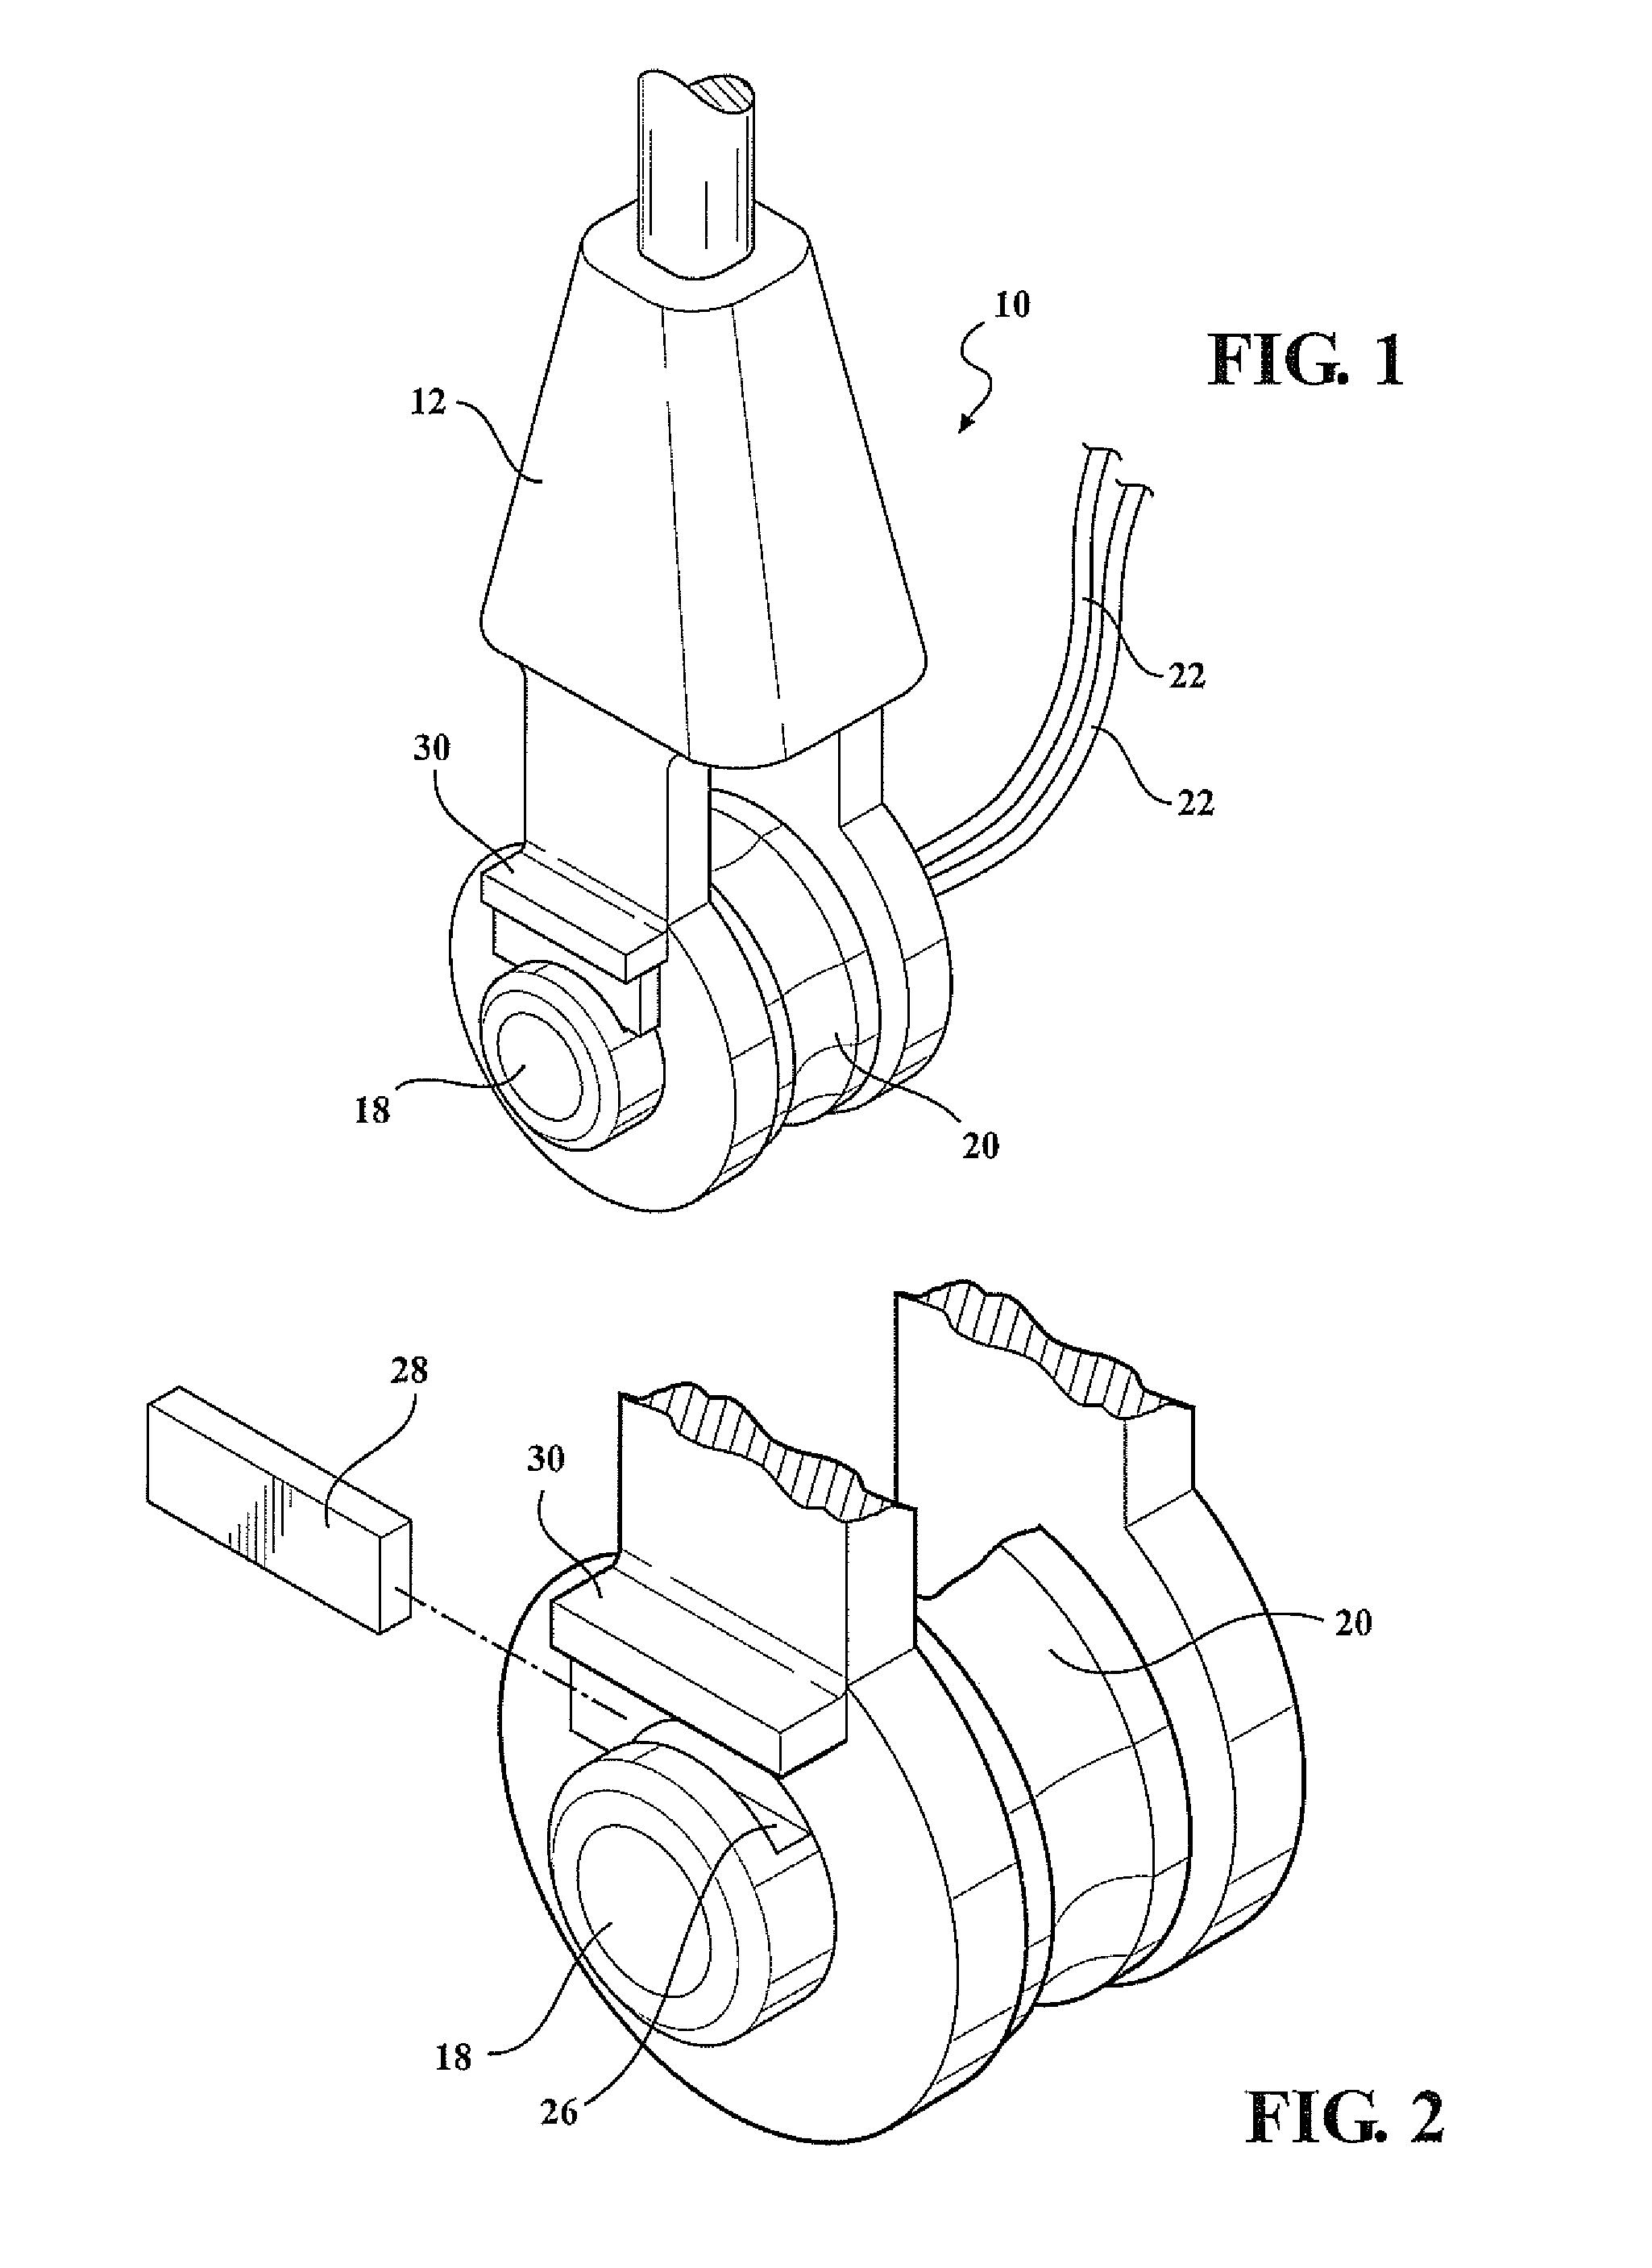 Load and torque sensing systems utilizing magnetic key for mechanical engagement